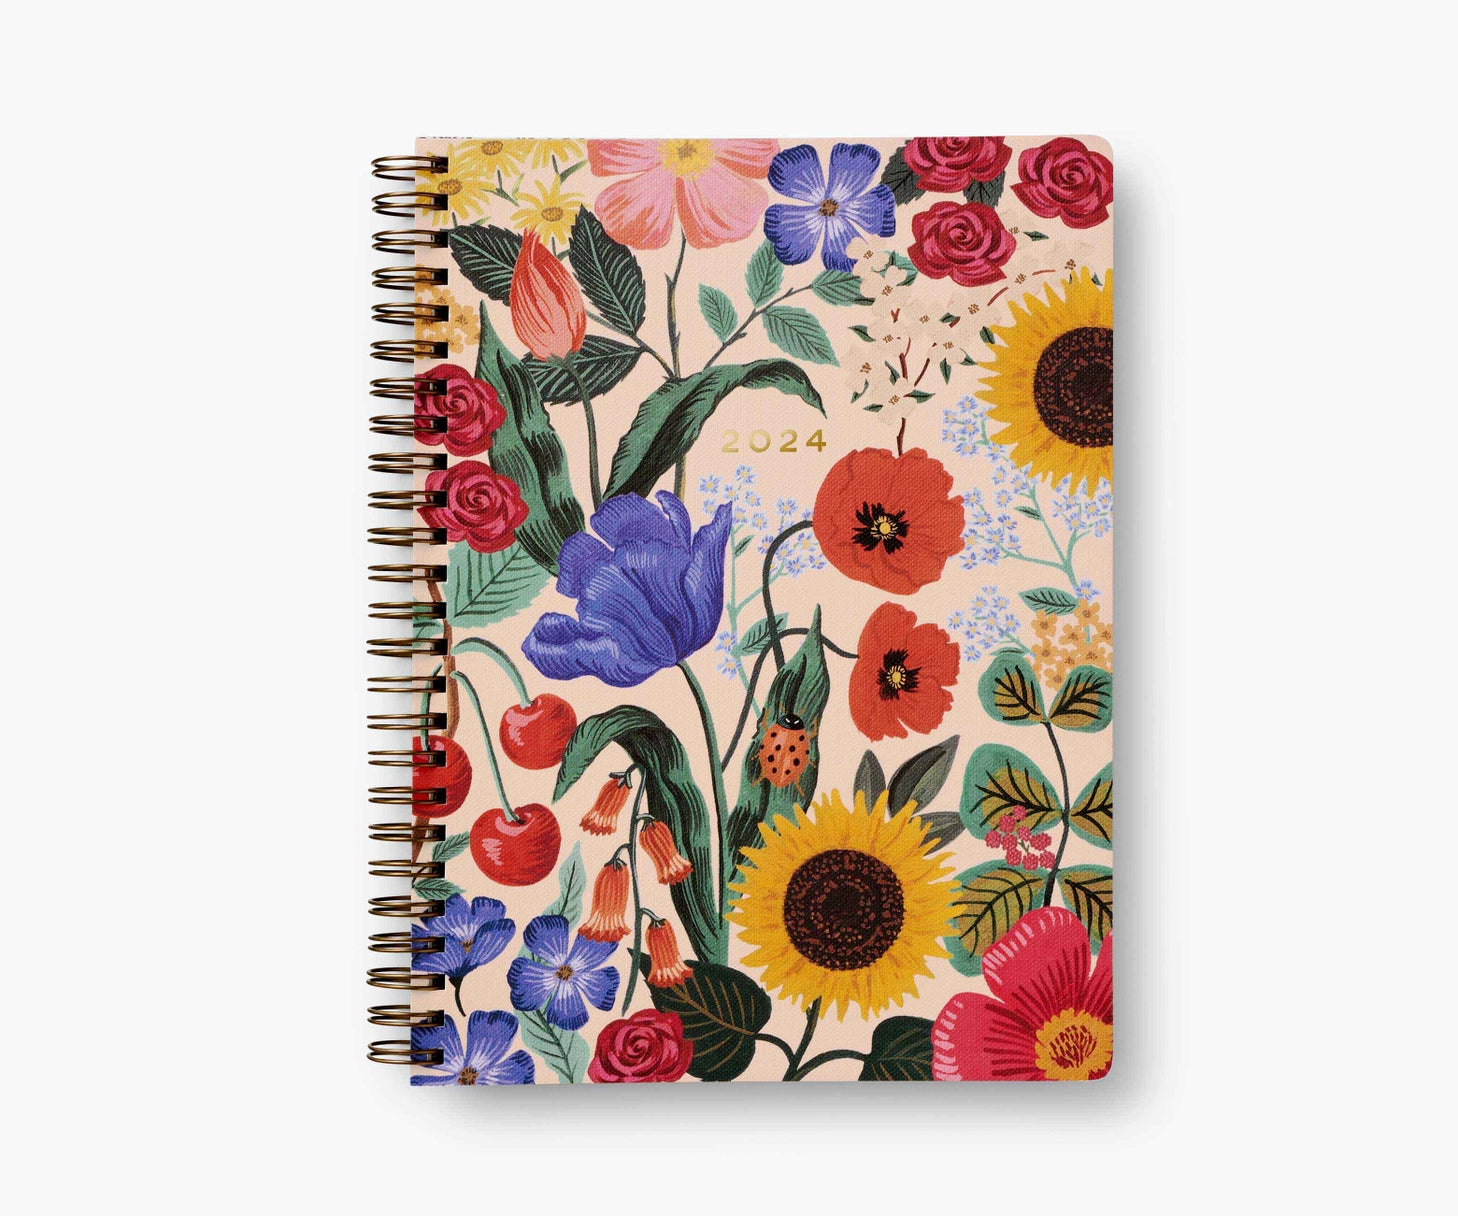 Rifle Paper Co. 2024 Blossom Spiral Planner